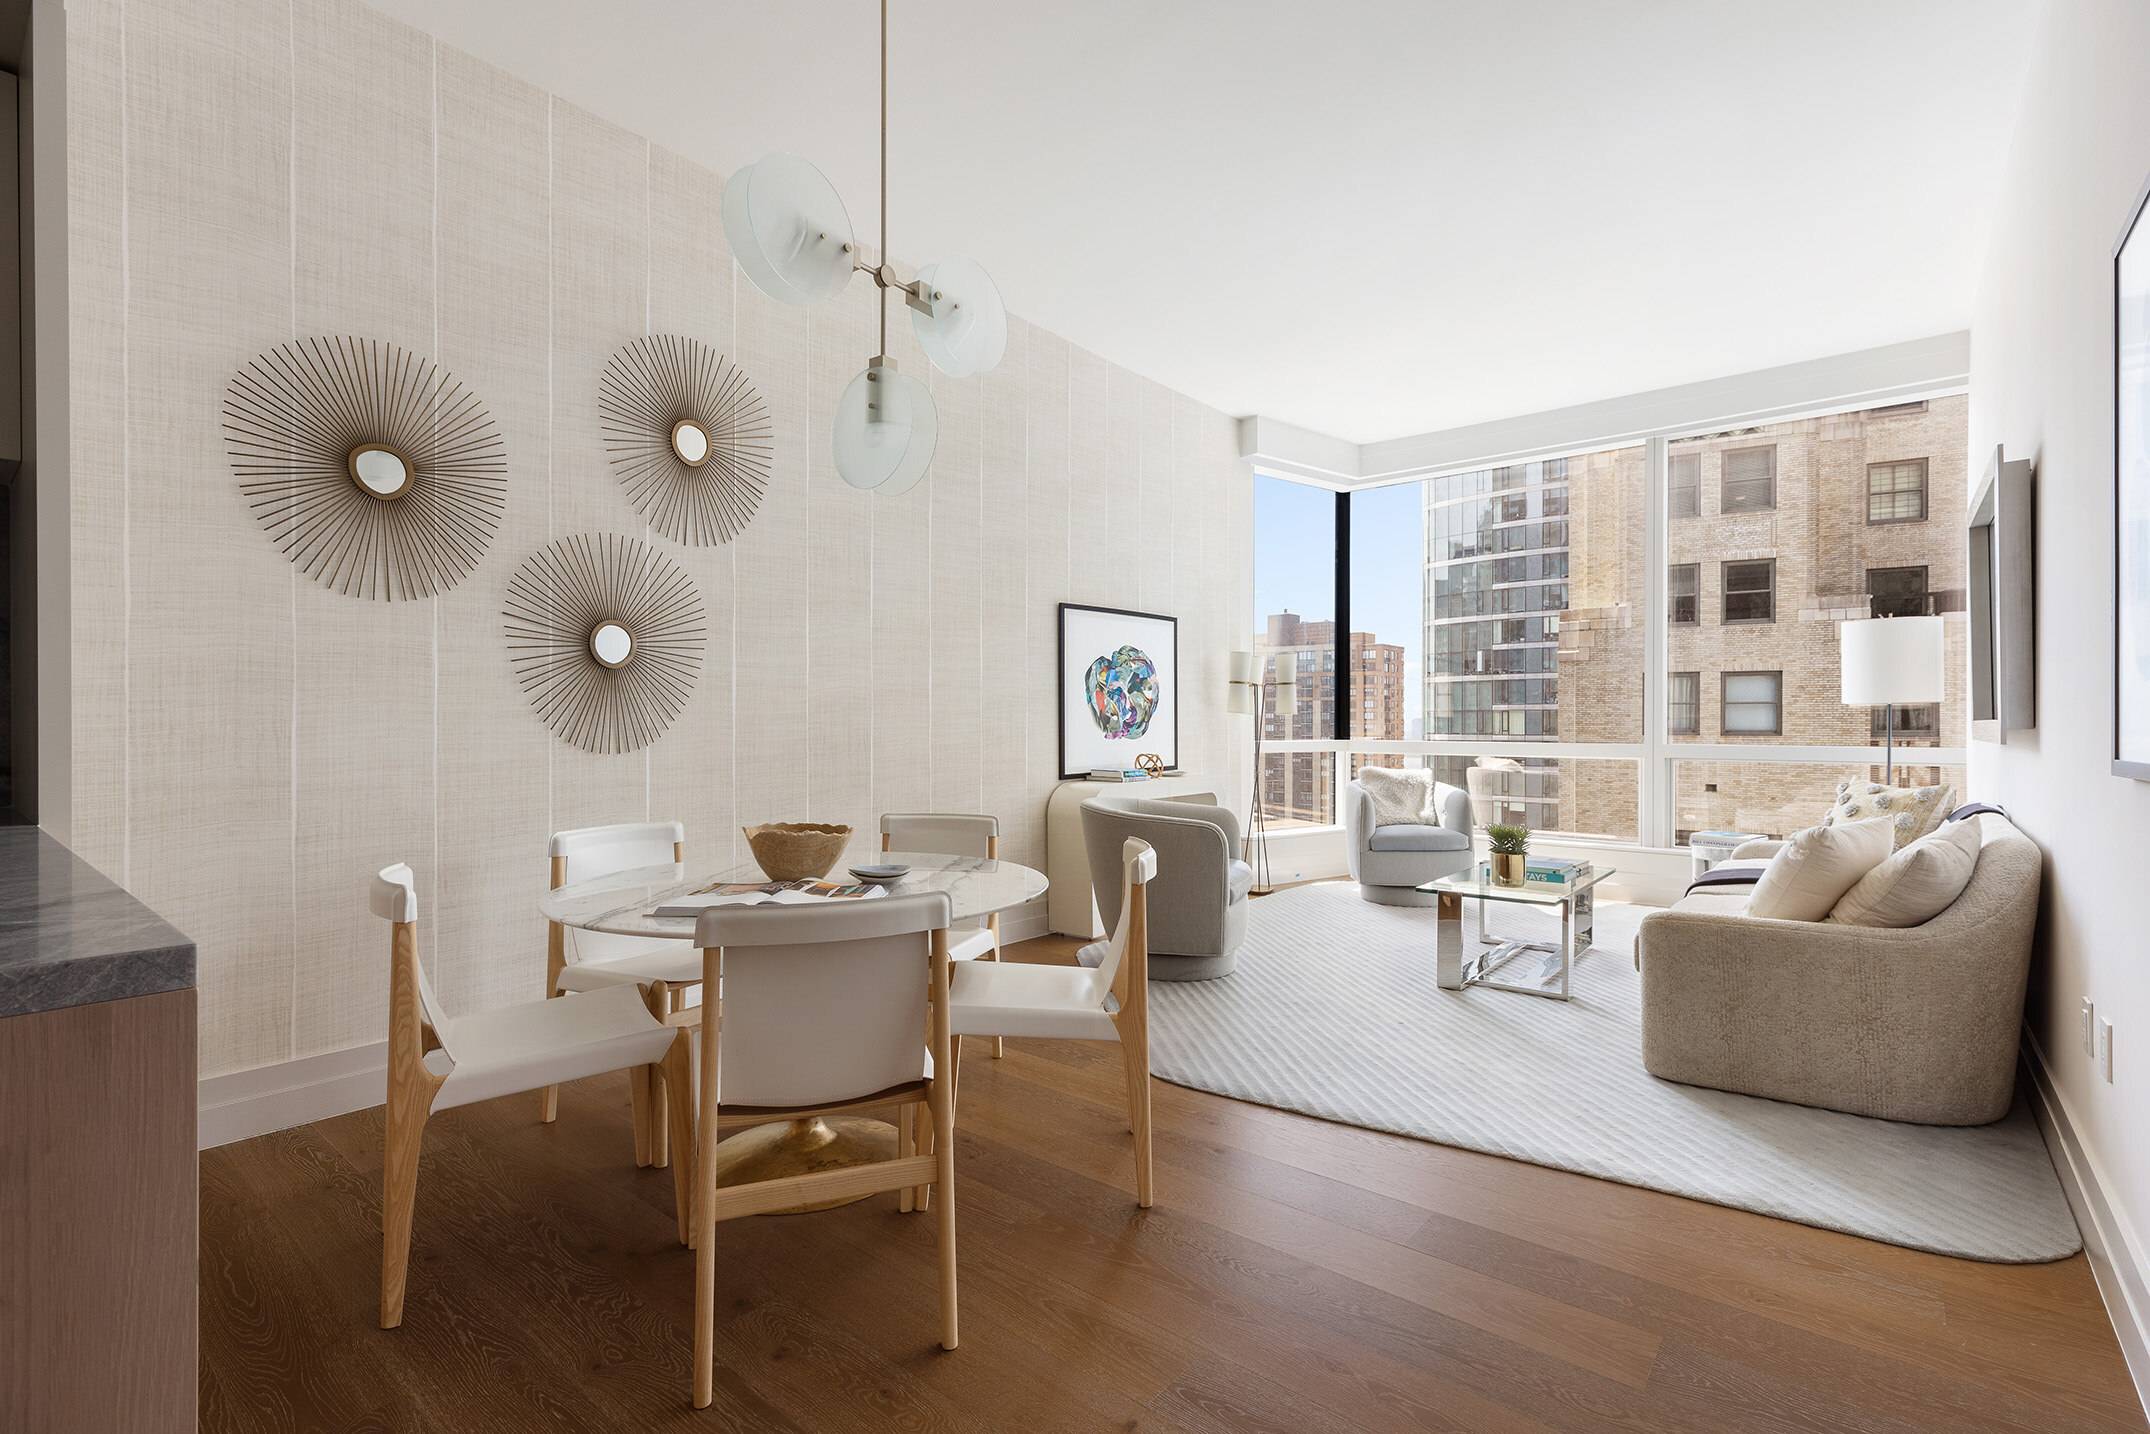 77 Greenwich is a LEED certified condominium featuring direct water views from every unit.